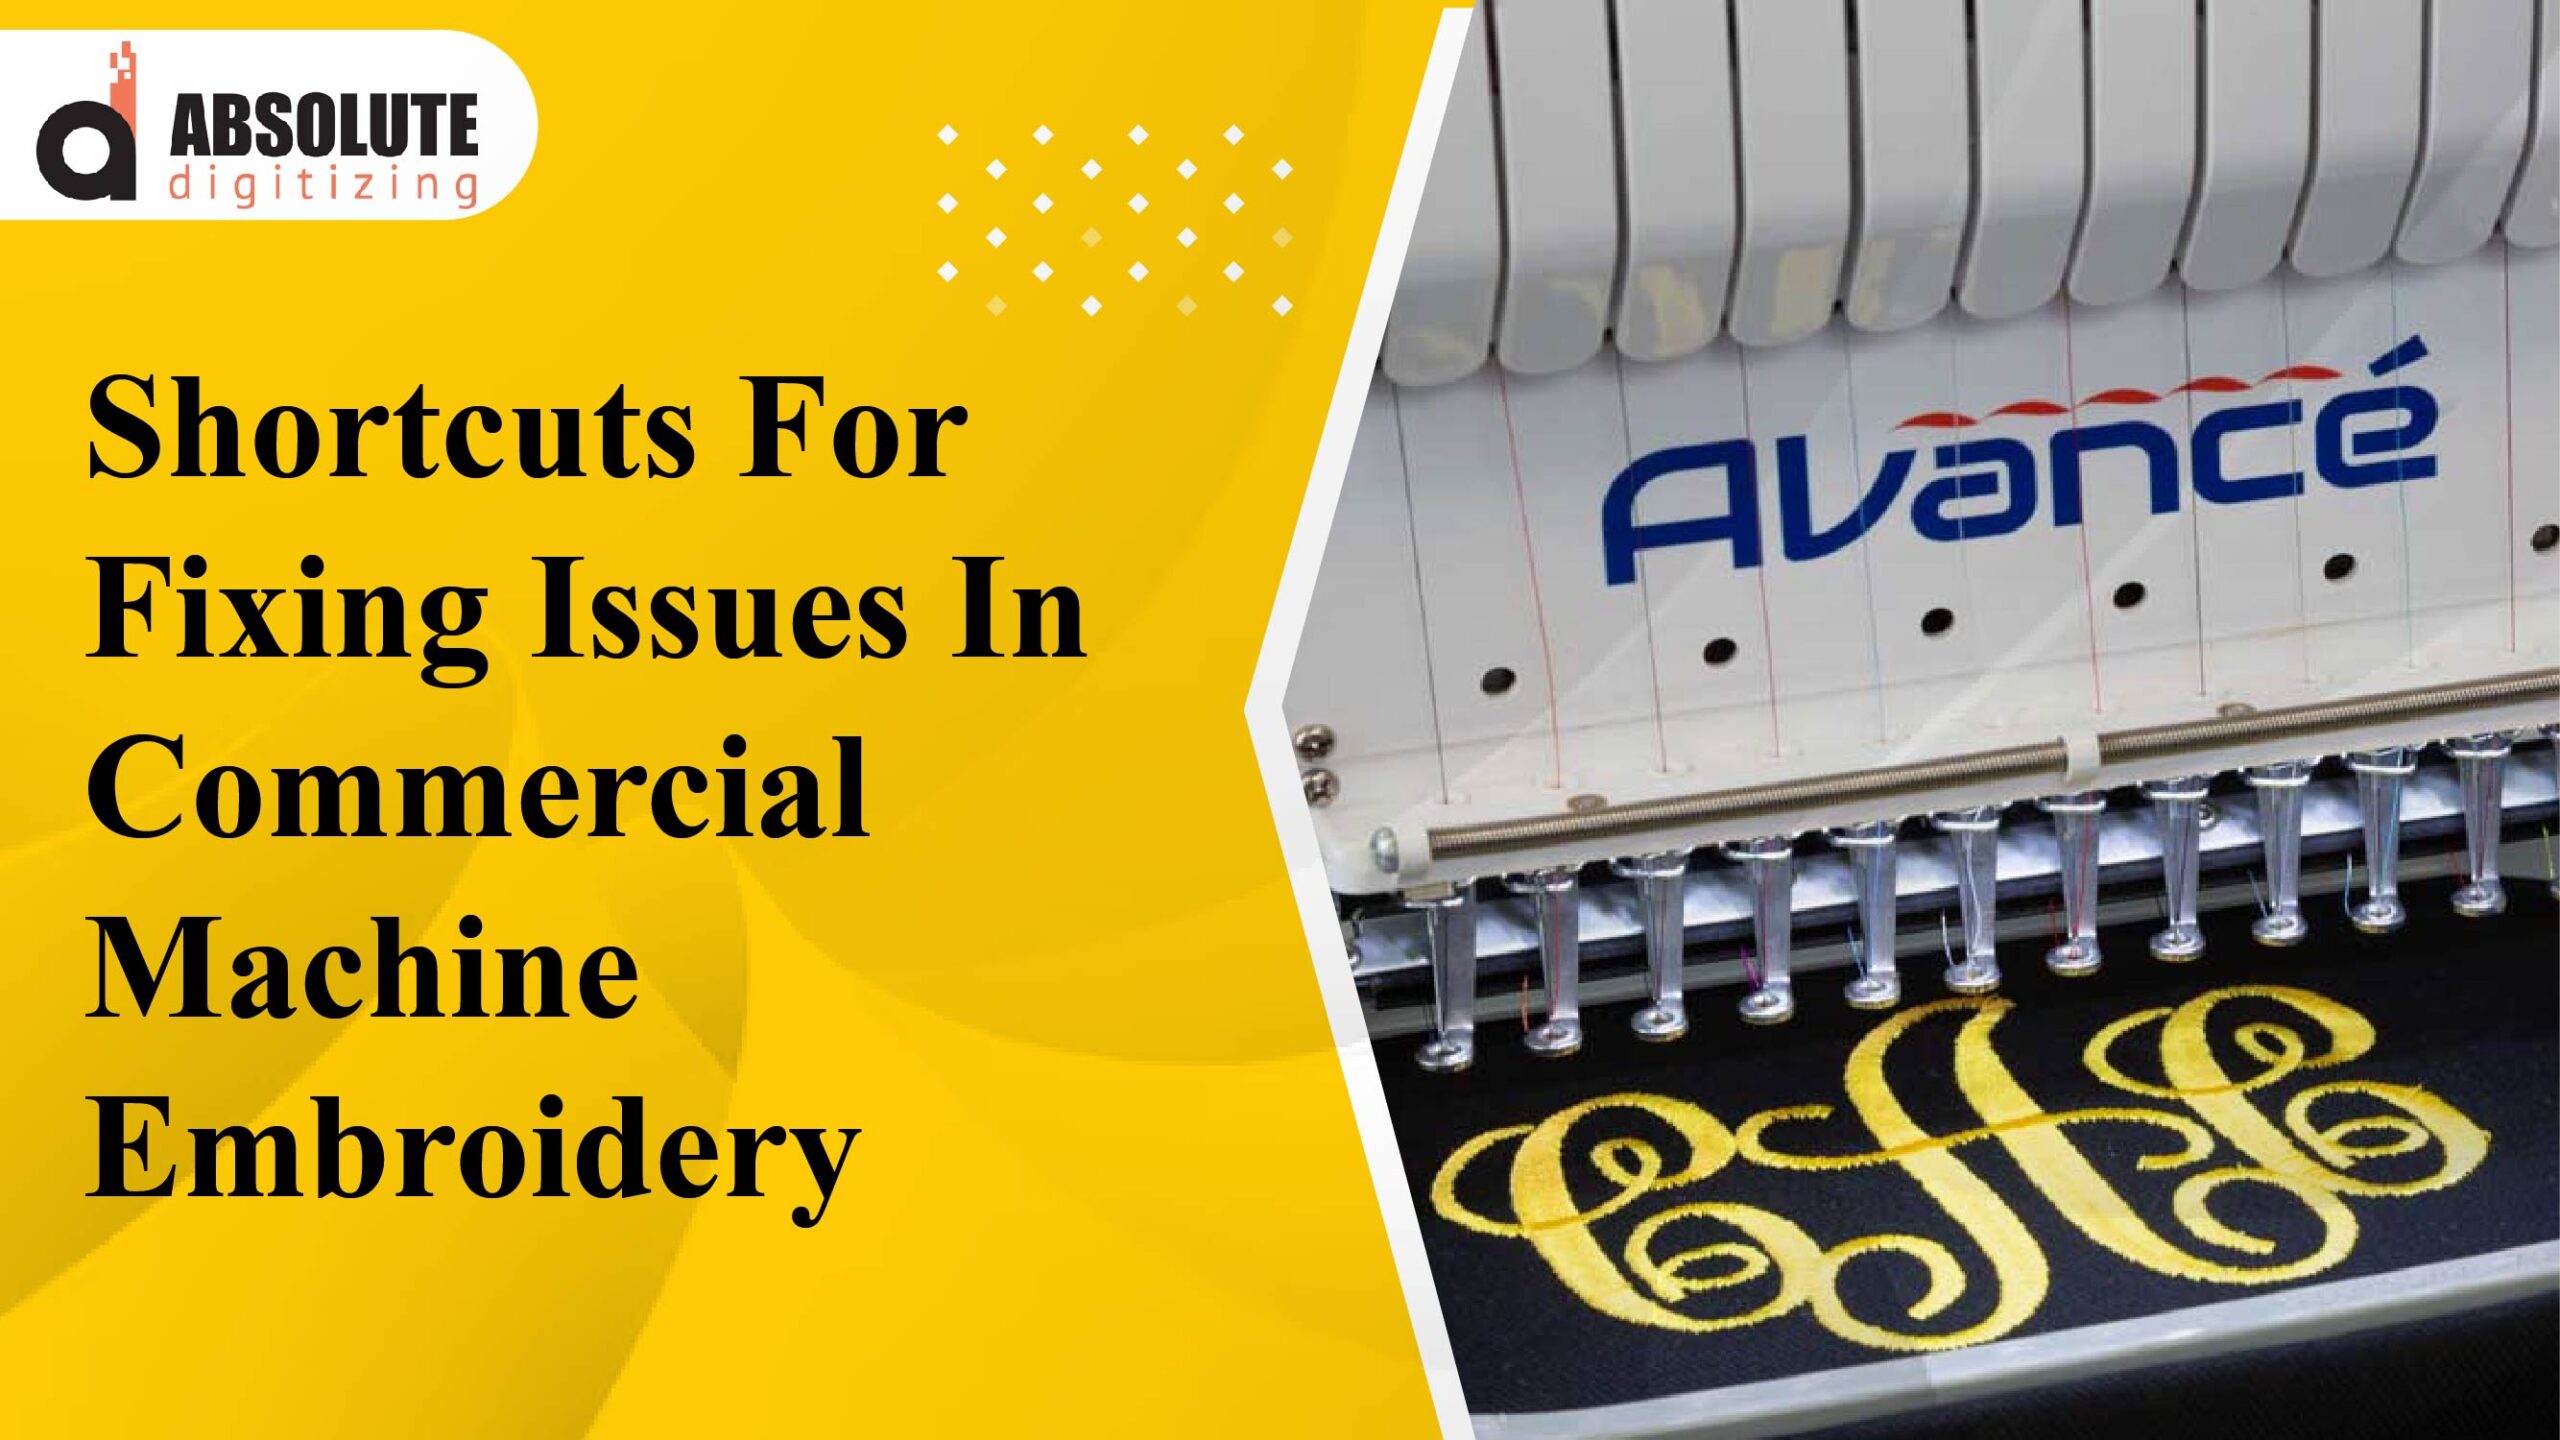 Shortcuts For Fixing Issues In Commercial Machine Embroidery